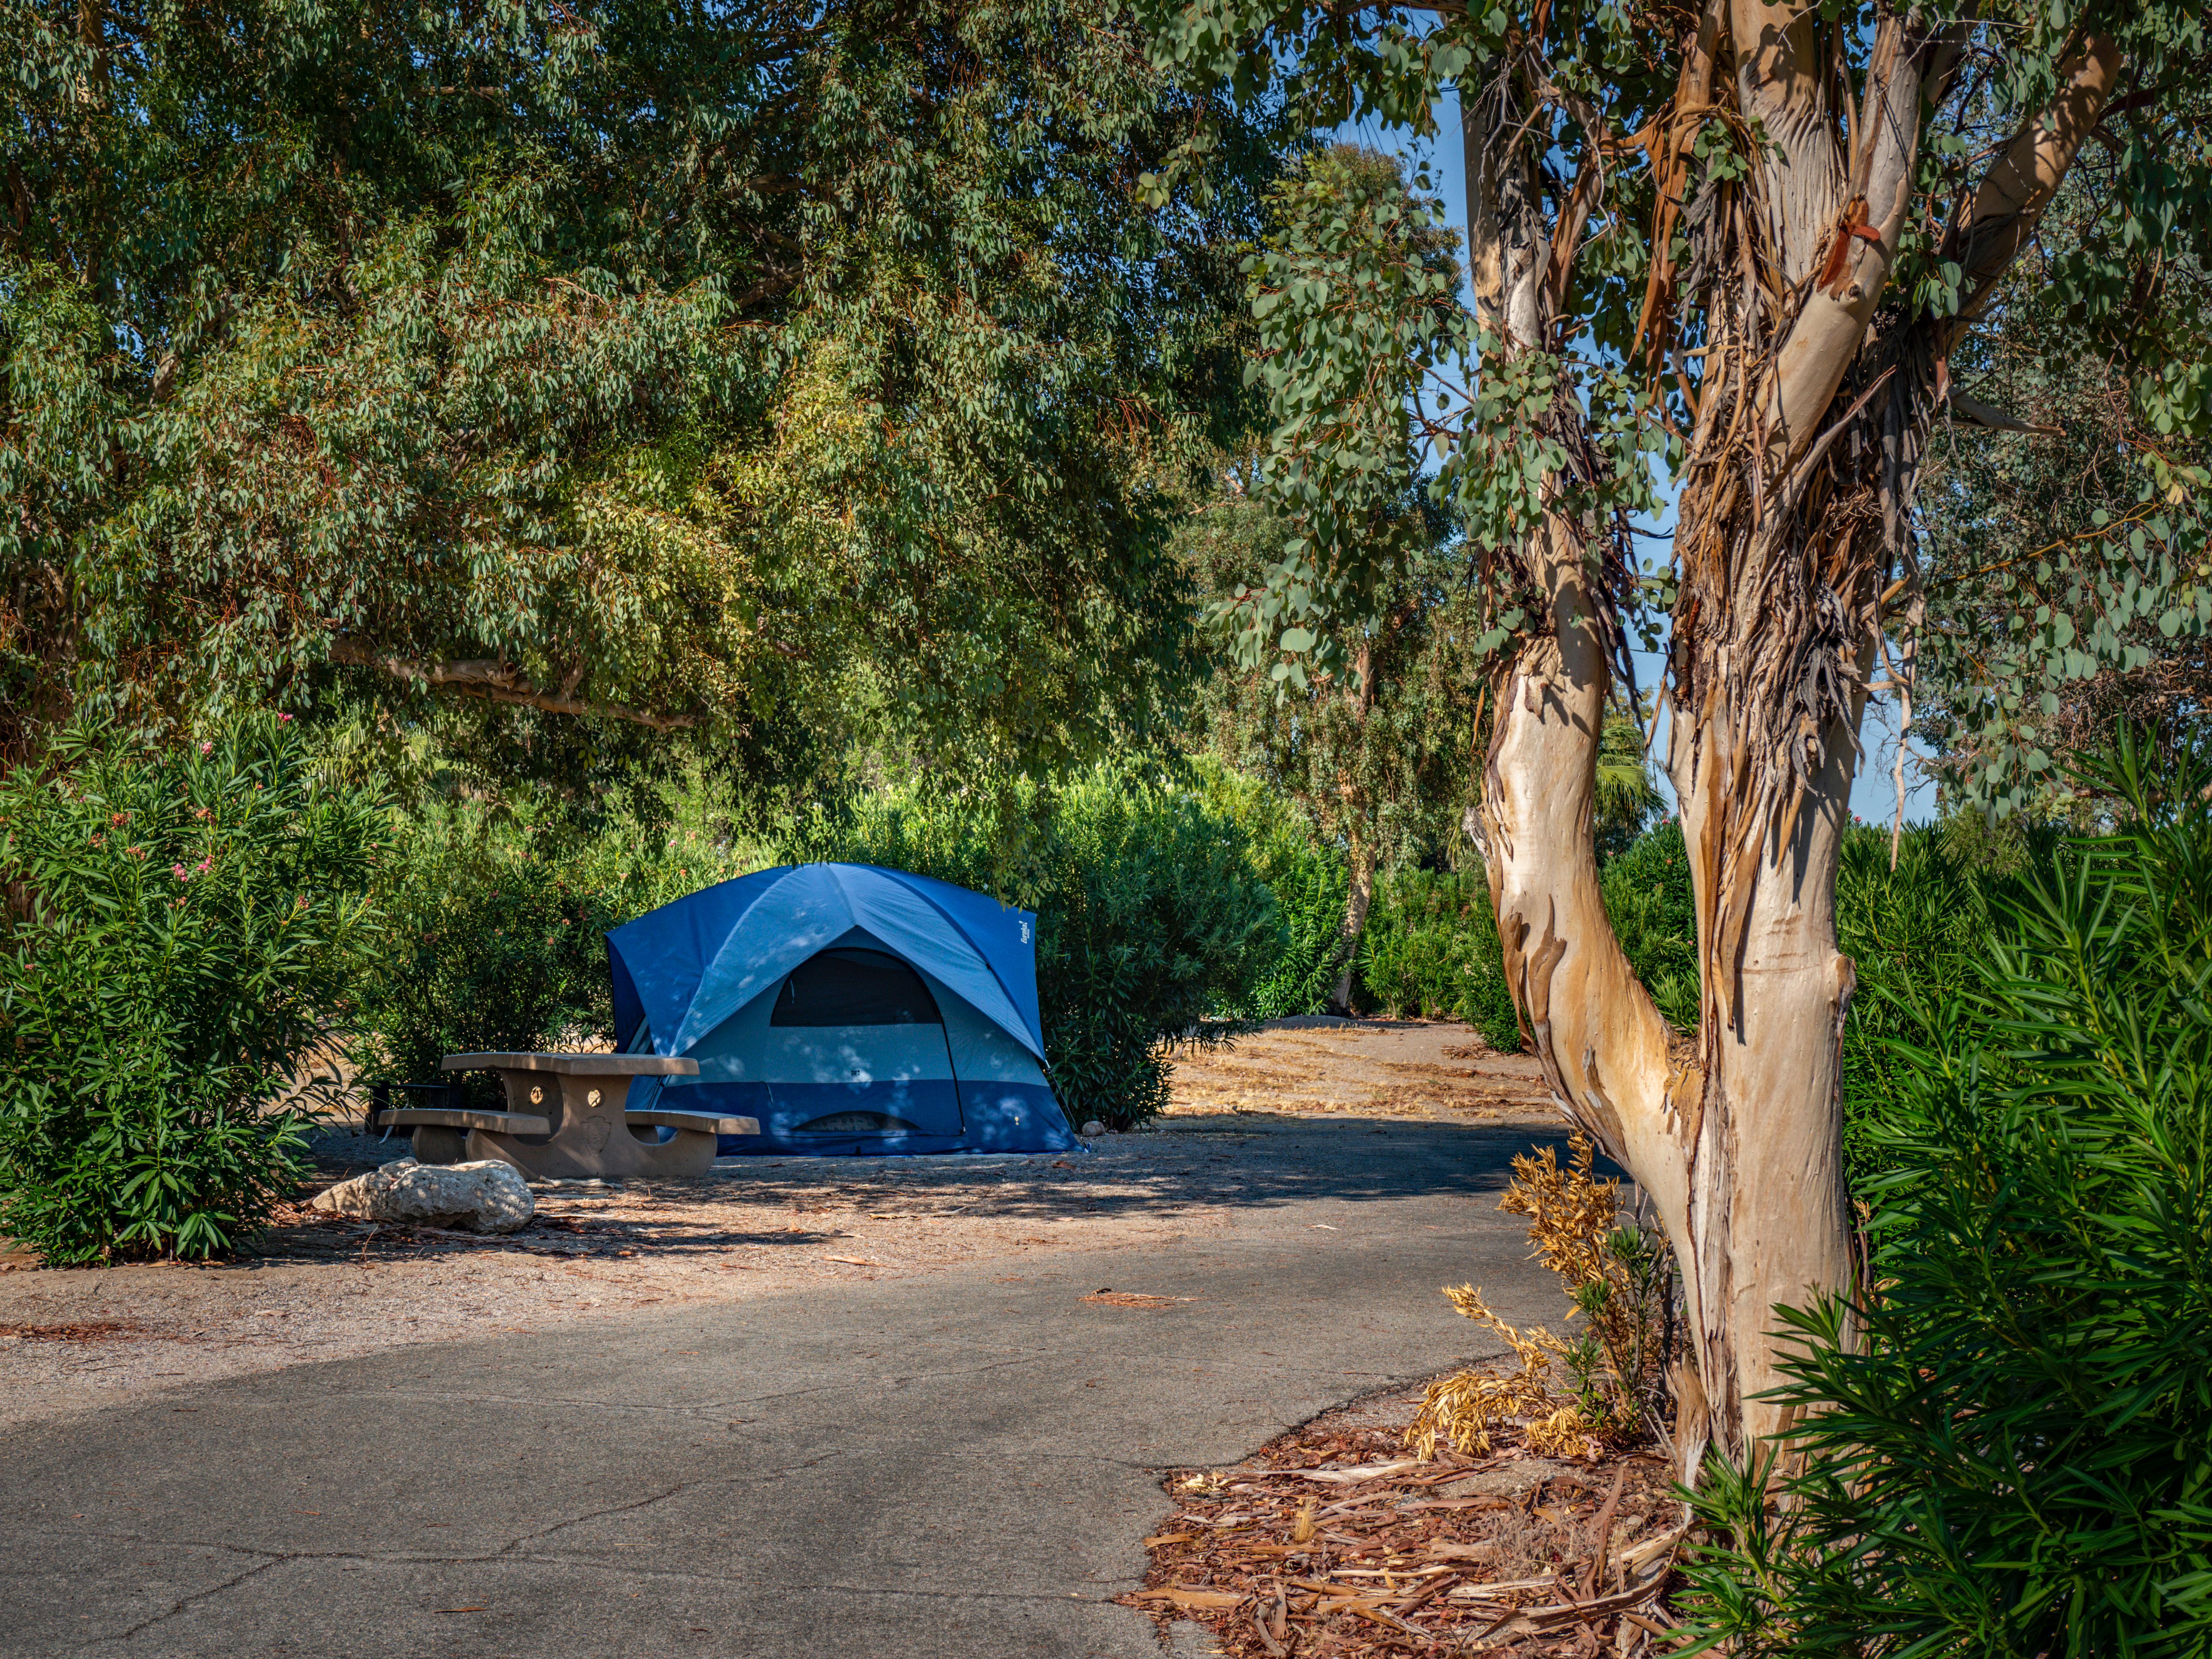 Desert campground with a tent and vegetation.